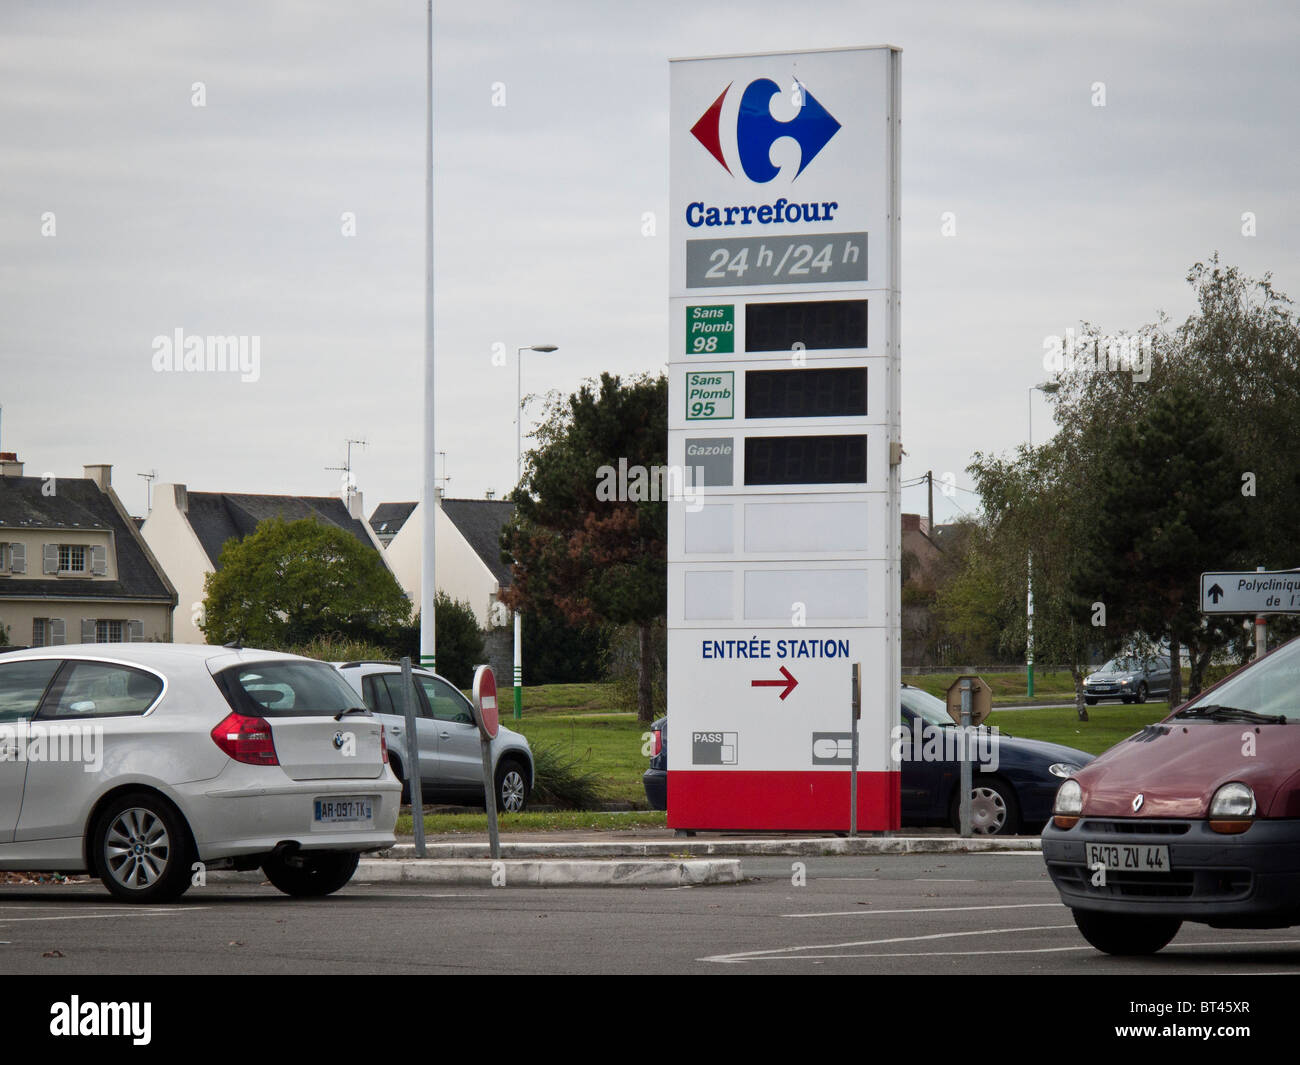 A sign shows no petrol prices at a petrol station at a Carrefour shopping center in Nantes, France, October 18, 2010. Stock Photo